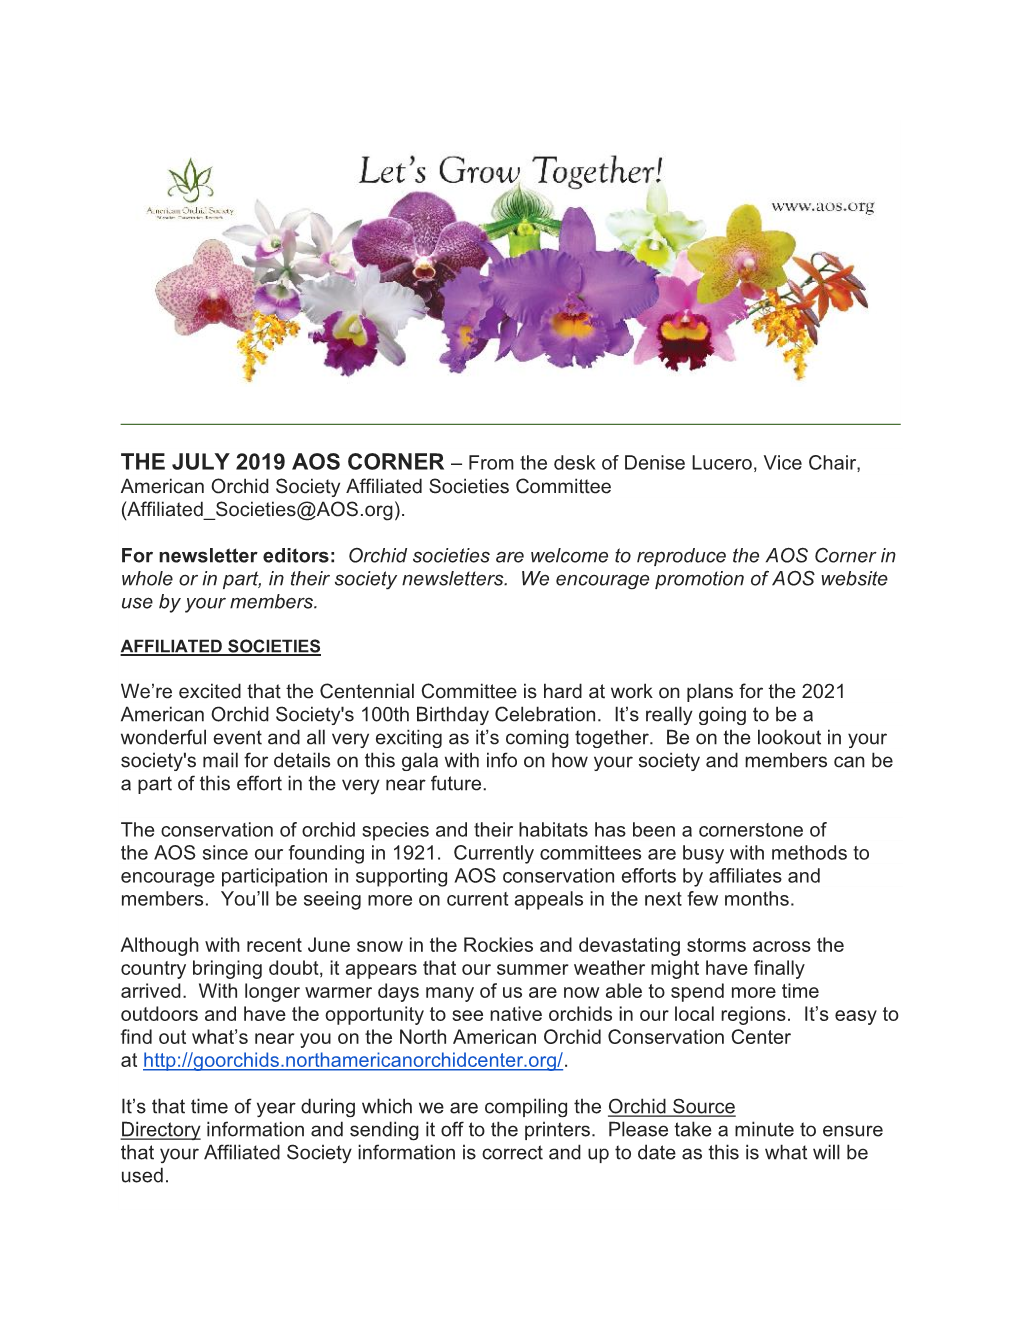 THE JULY 2019 AOS CORNER – from the Desk of Denise Lucero, Vice Chair, American Orchid Society Affiliated Societies Committee (Affiliated Societies@AOS.Org)